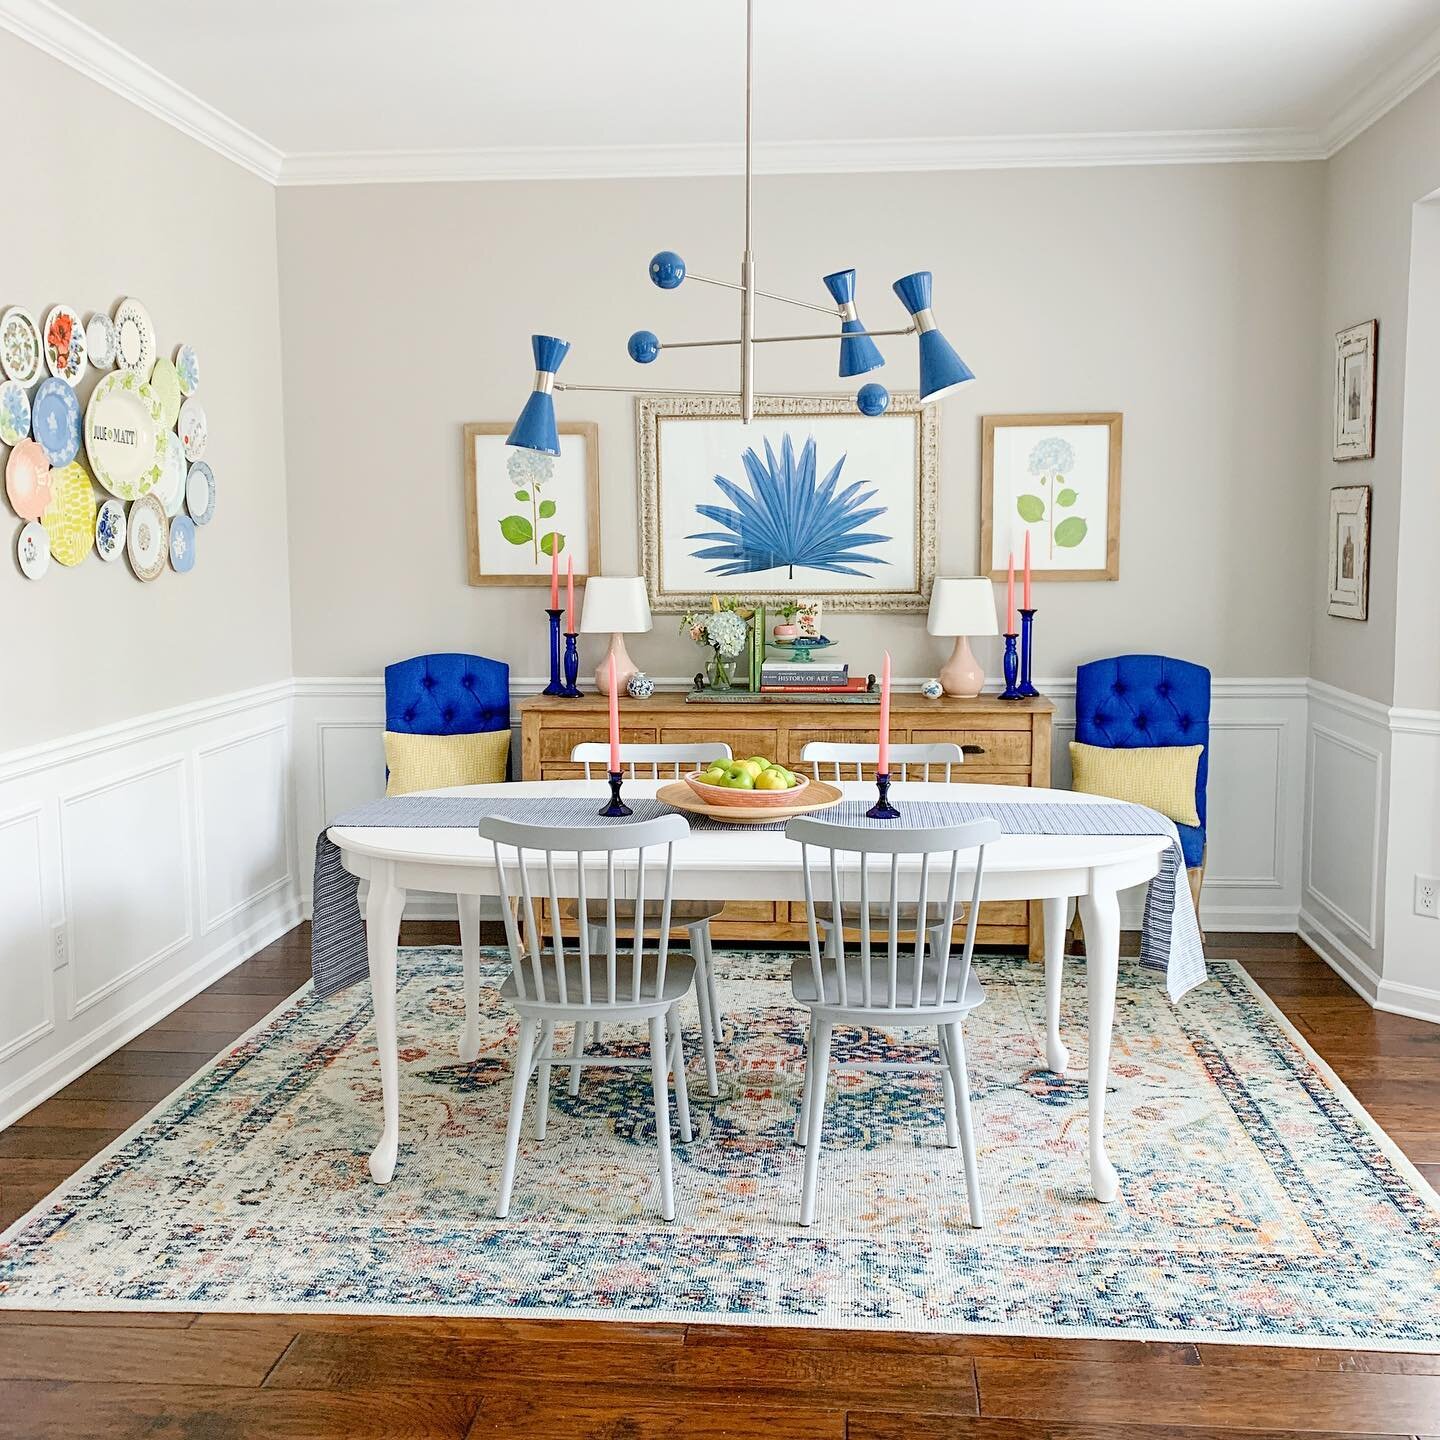 As we head towards a new year, I thought I&rsquo;d share some of my favorite projects from the last year! Our house is constantly evolving as we slowly make it our own.

I&rsquo;ve never had a formal dining room, and I was excited to finish this spac